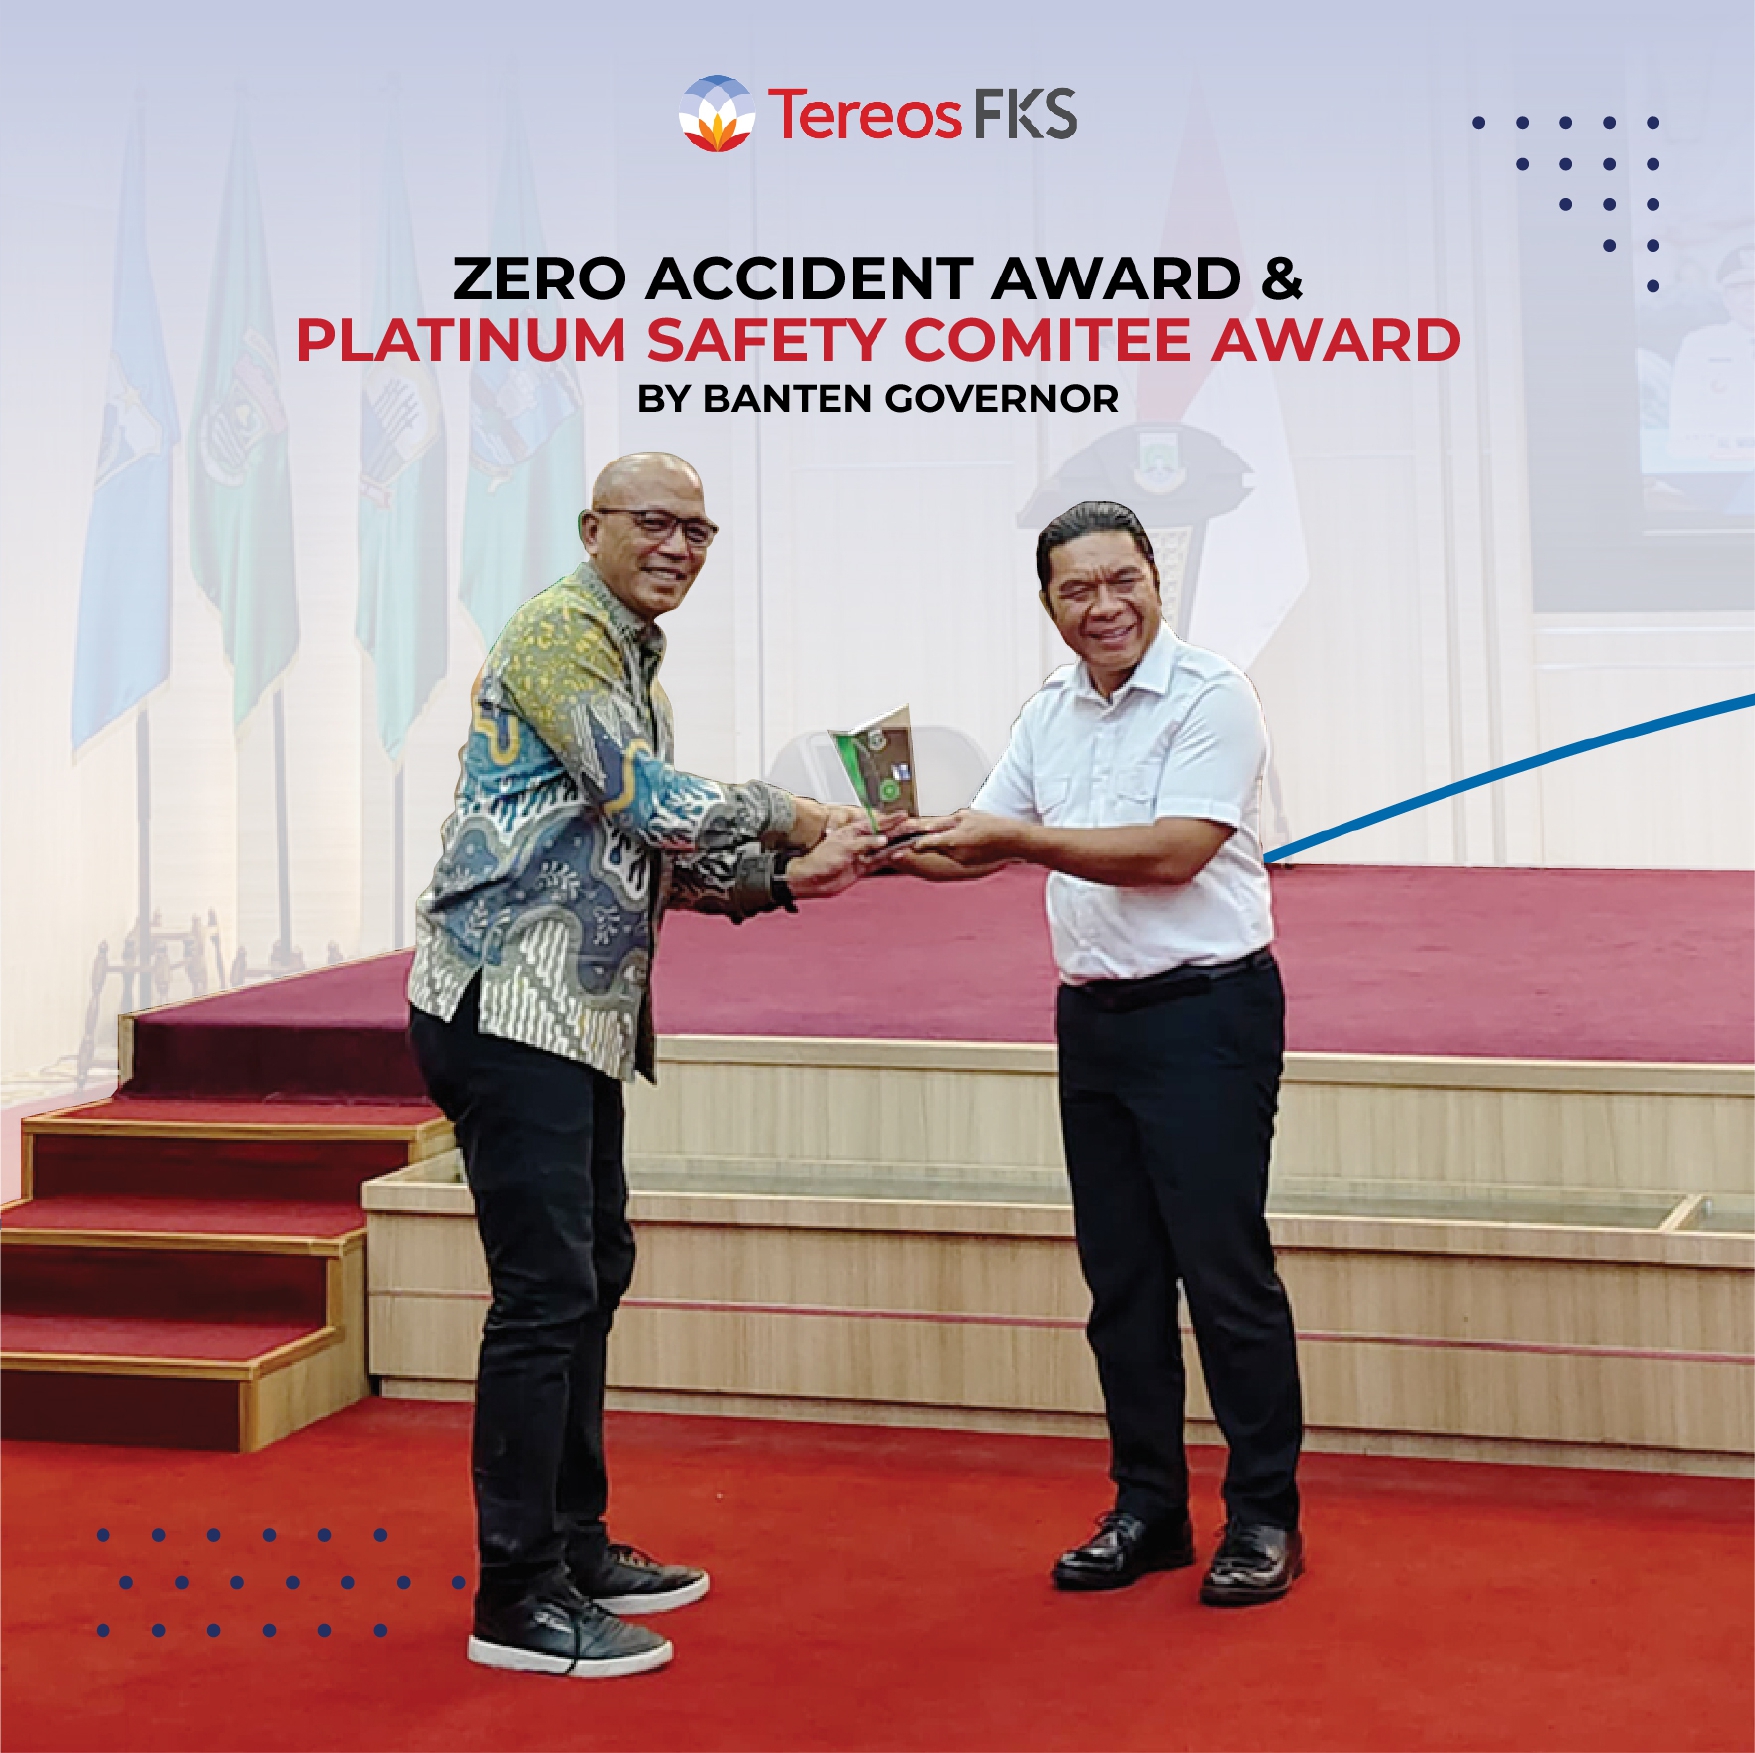 Tereos FKS Indonesia achieving the Platinum Safety Committee Award and Zero Accident Award